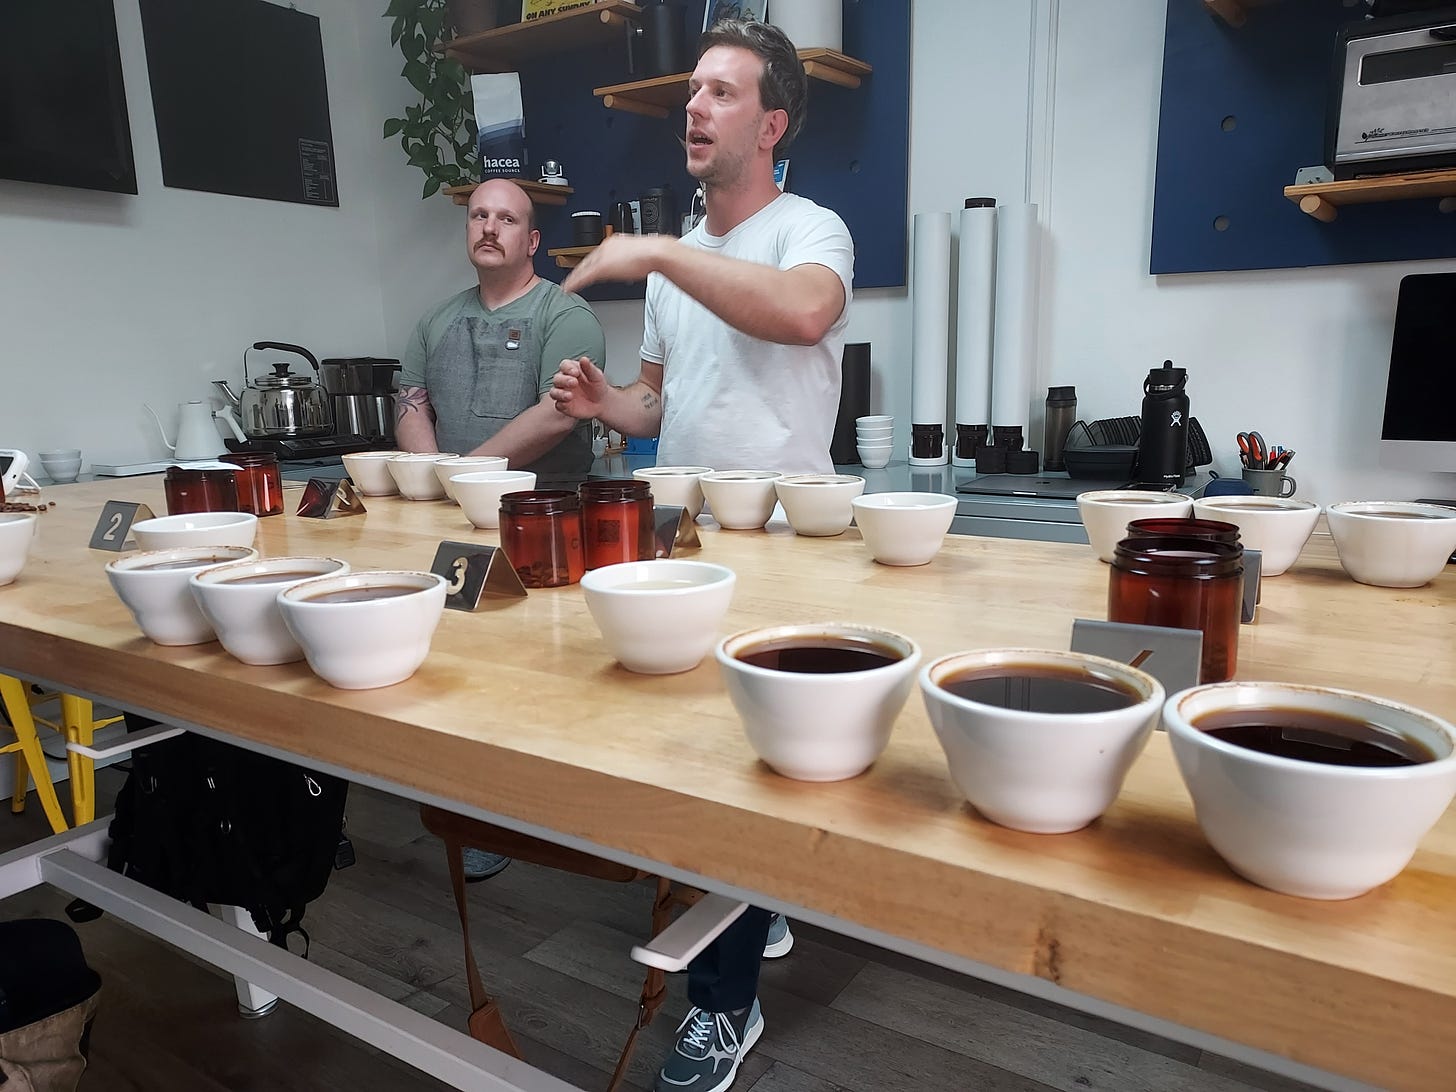 A teacher standing behind a table filled with coffee cupping bowls gestures wildly while talking about coffee. A mustachioed gentleman looks on.